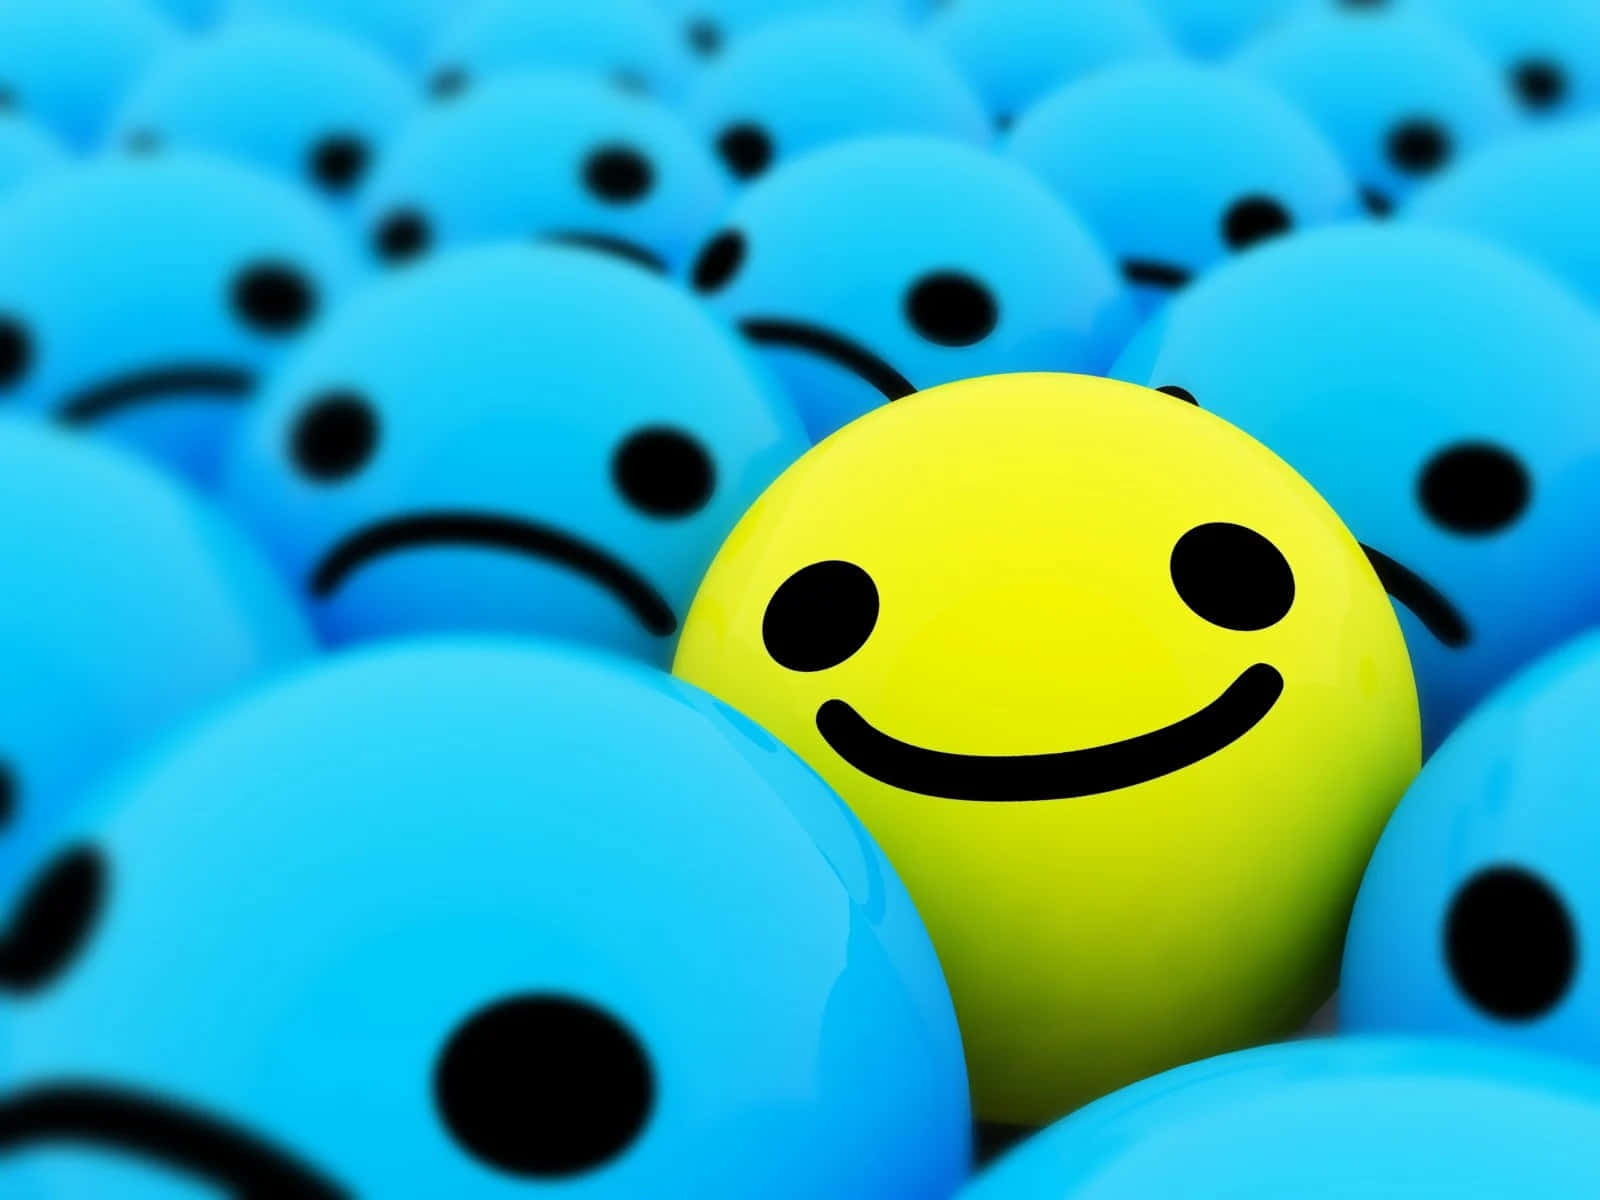 A Yellow Smiley Face Is Standing In A Group Of Blue Balls